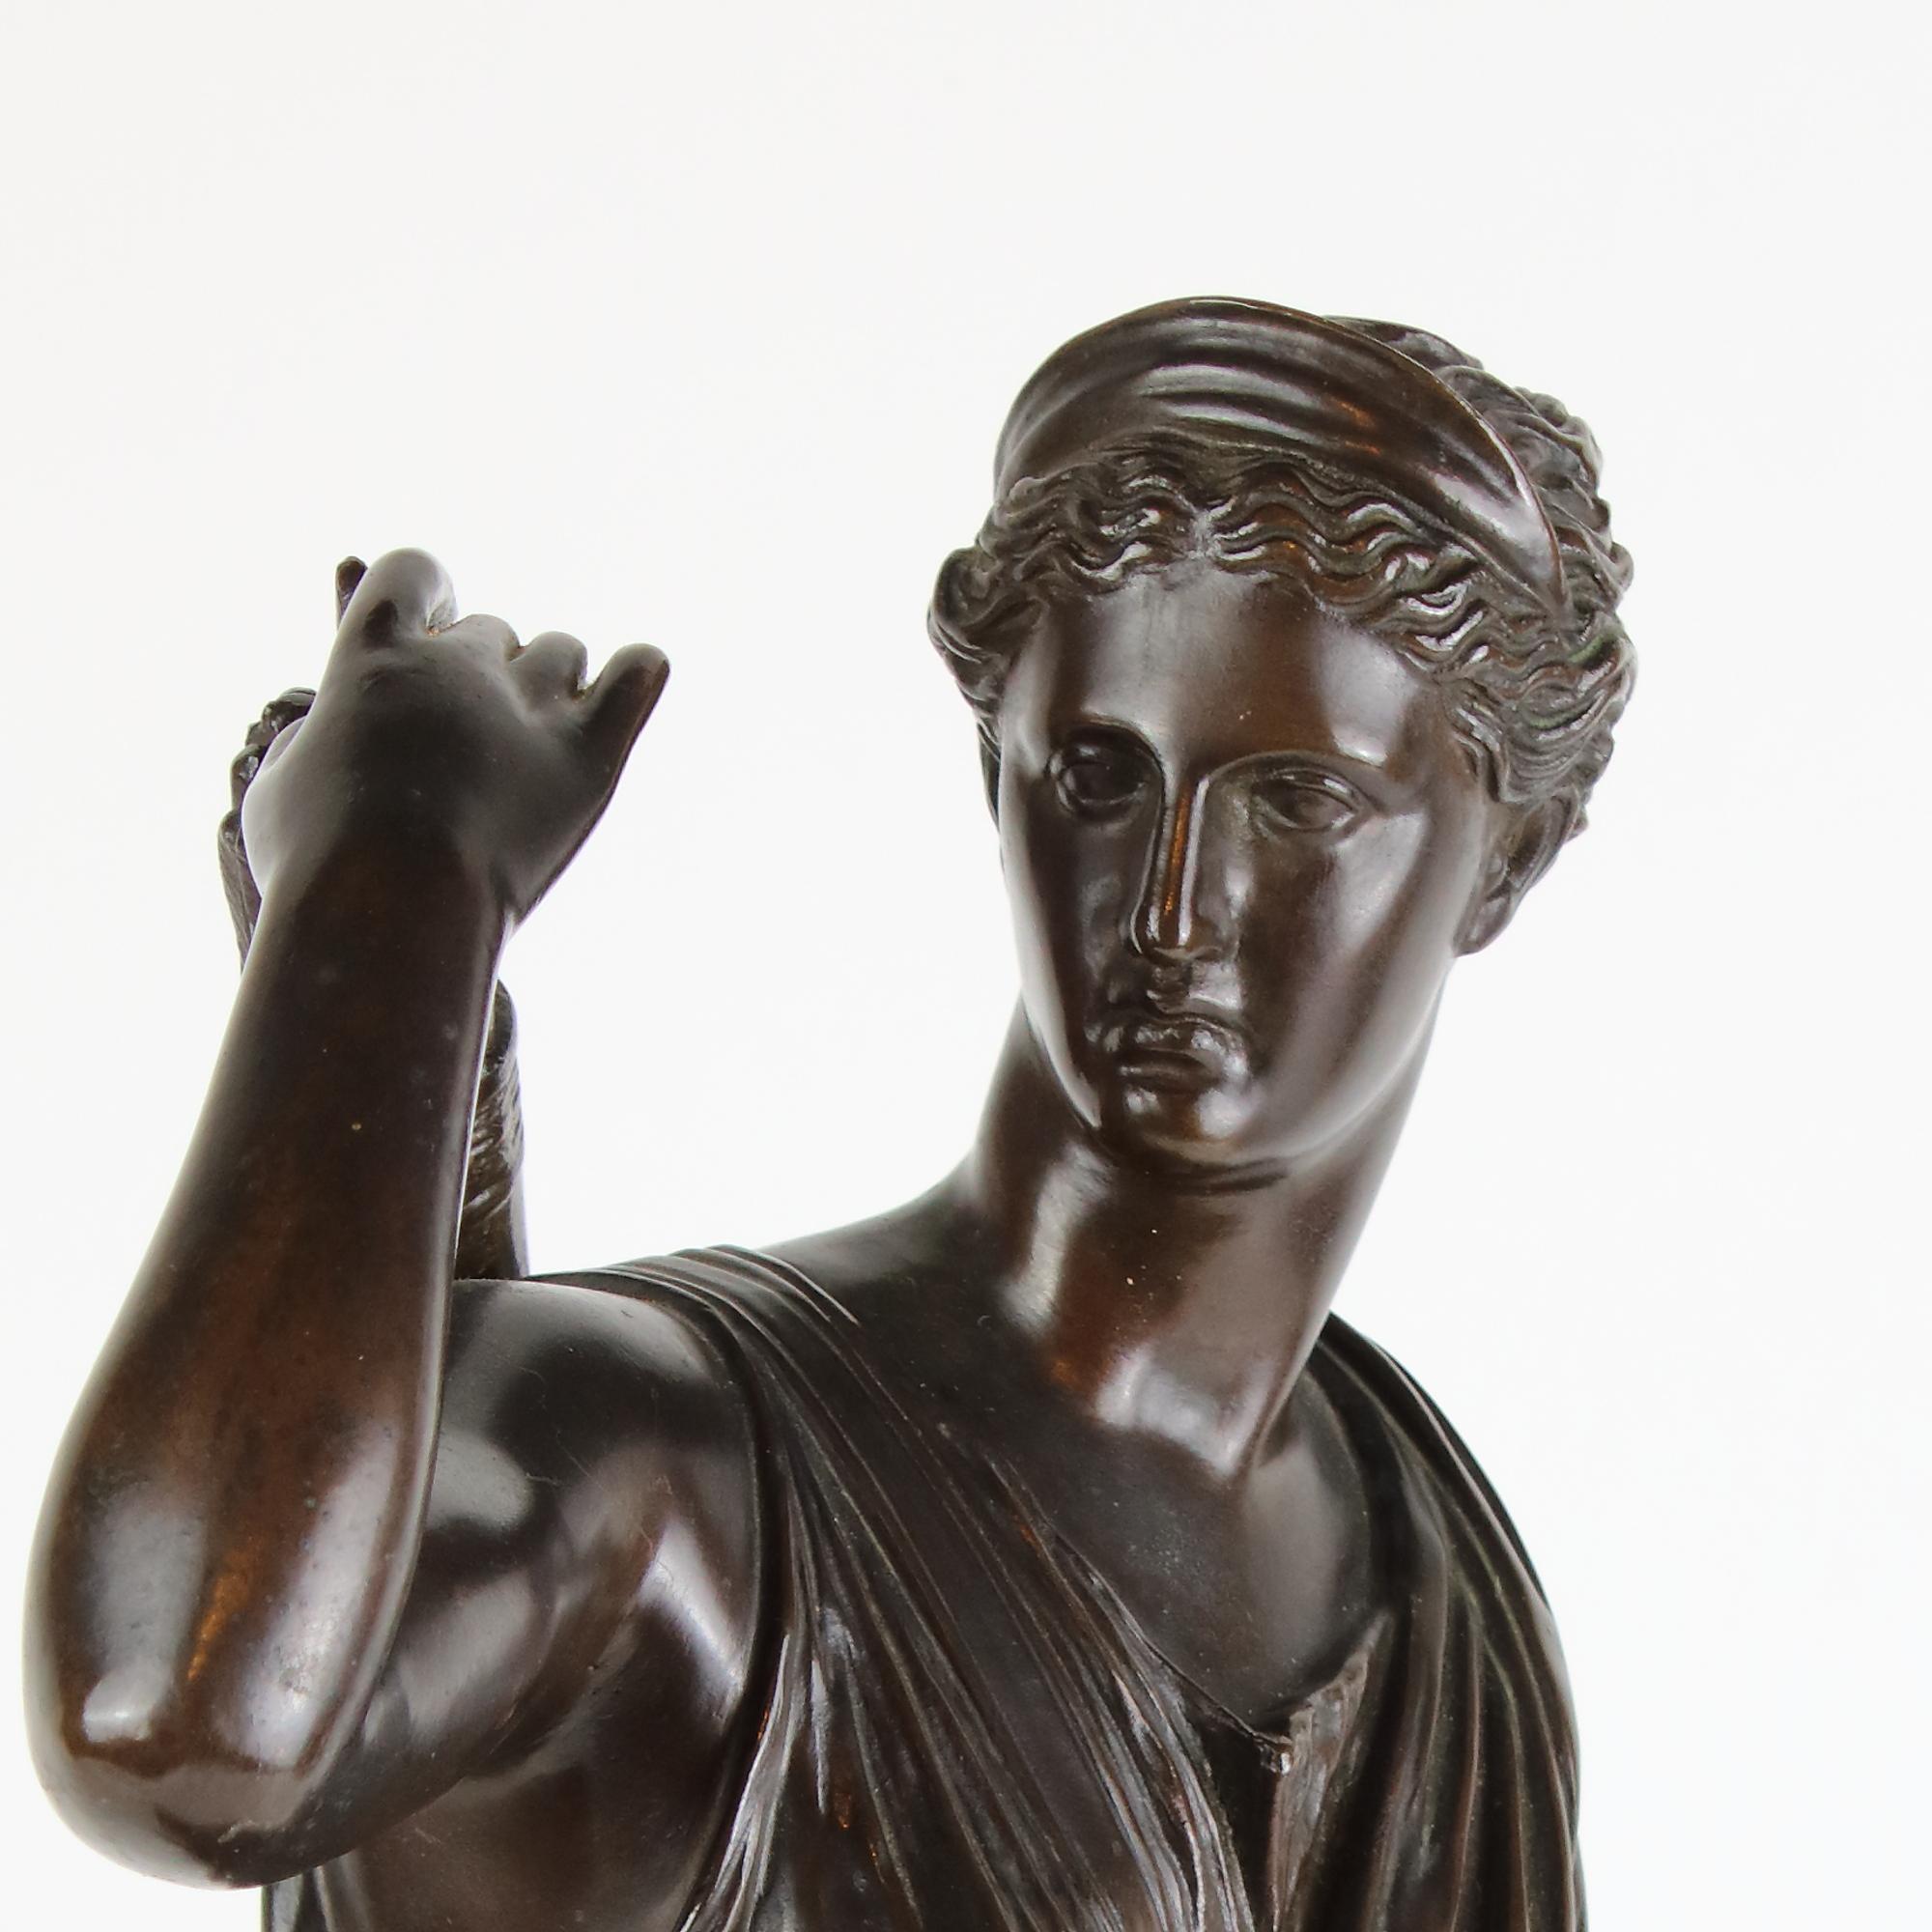 French 19th Century Patinated Bronze Sculpture Copy of Roman Diana of Versailles

Patinated bronze sculpture of youthful Diana, goddess of the Hunt on a rectangular plinth clad in a short peplum and caught in the moment of running; her right arm